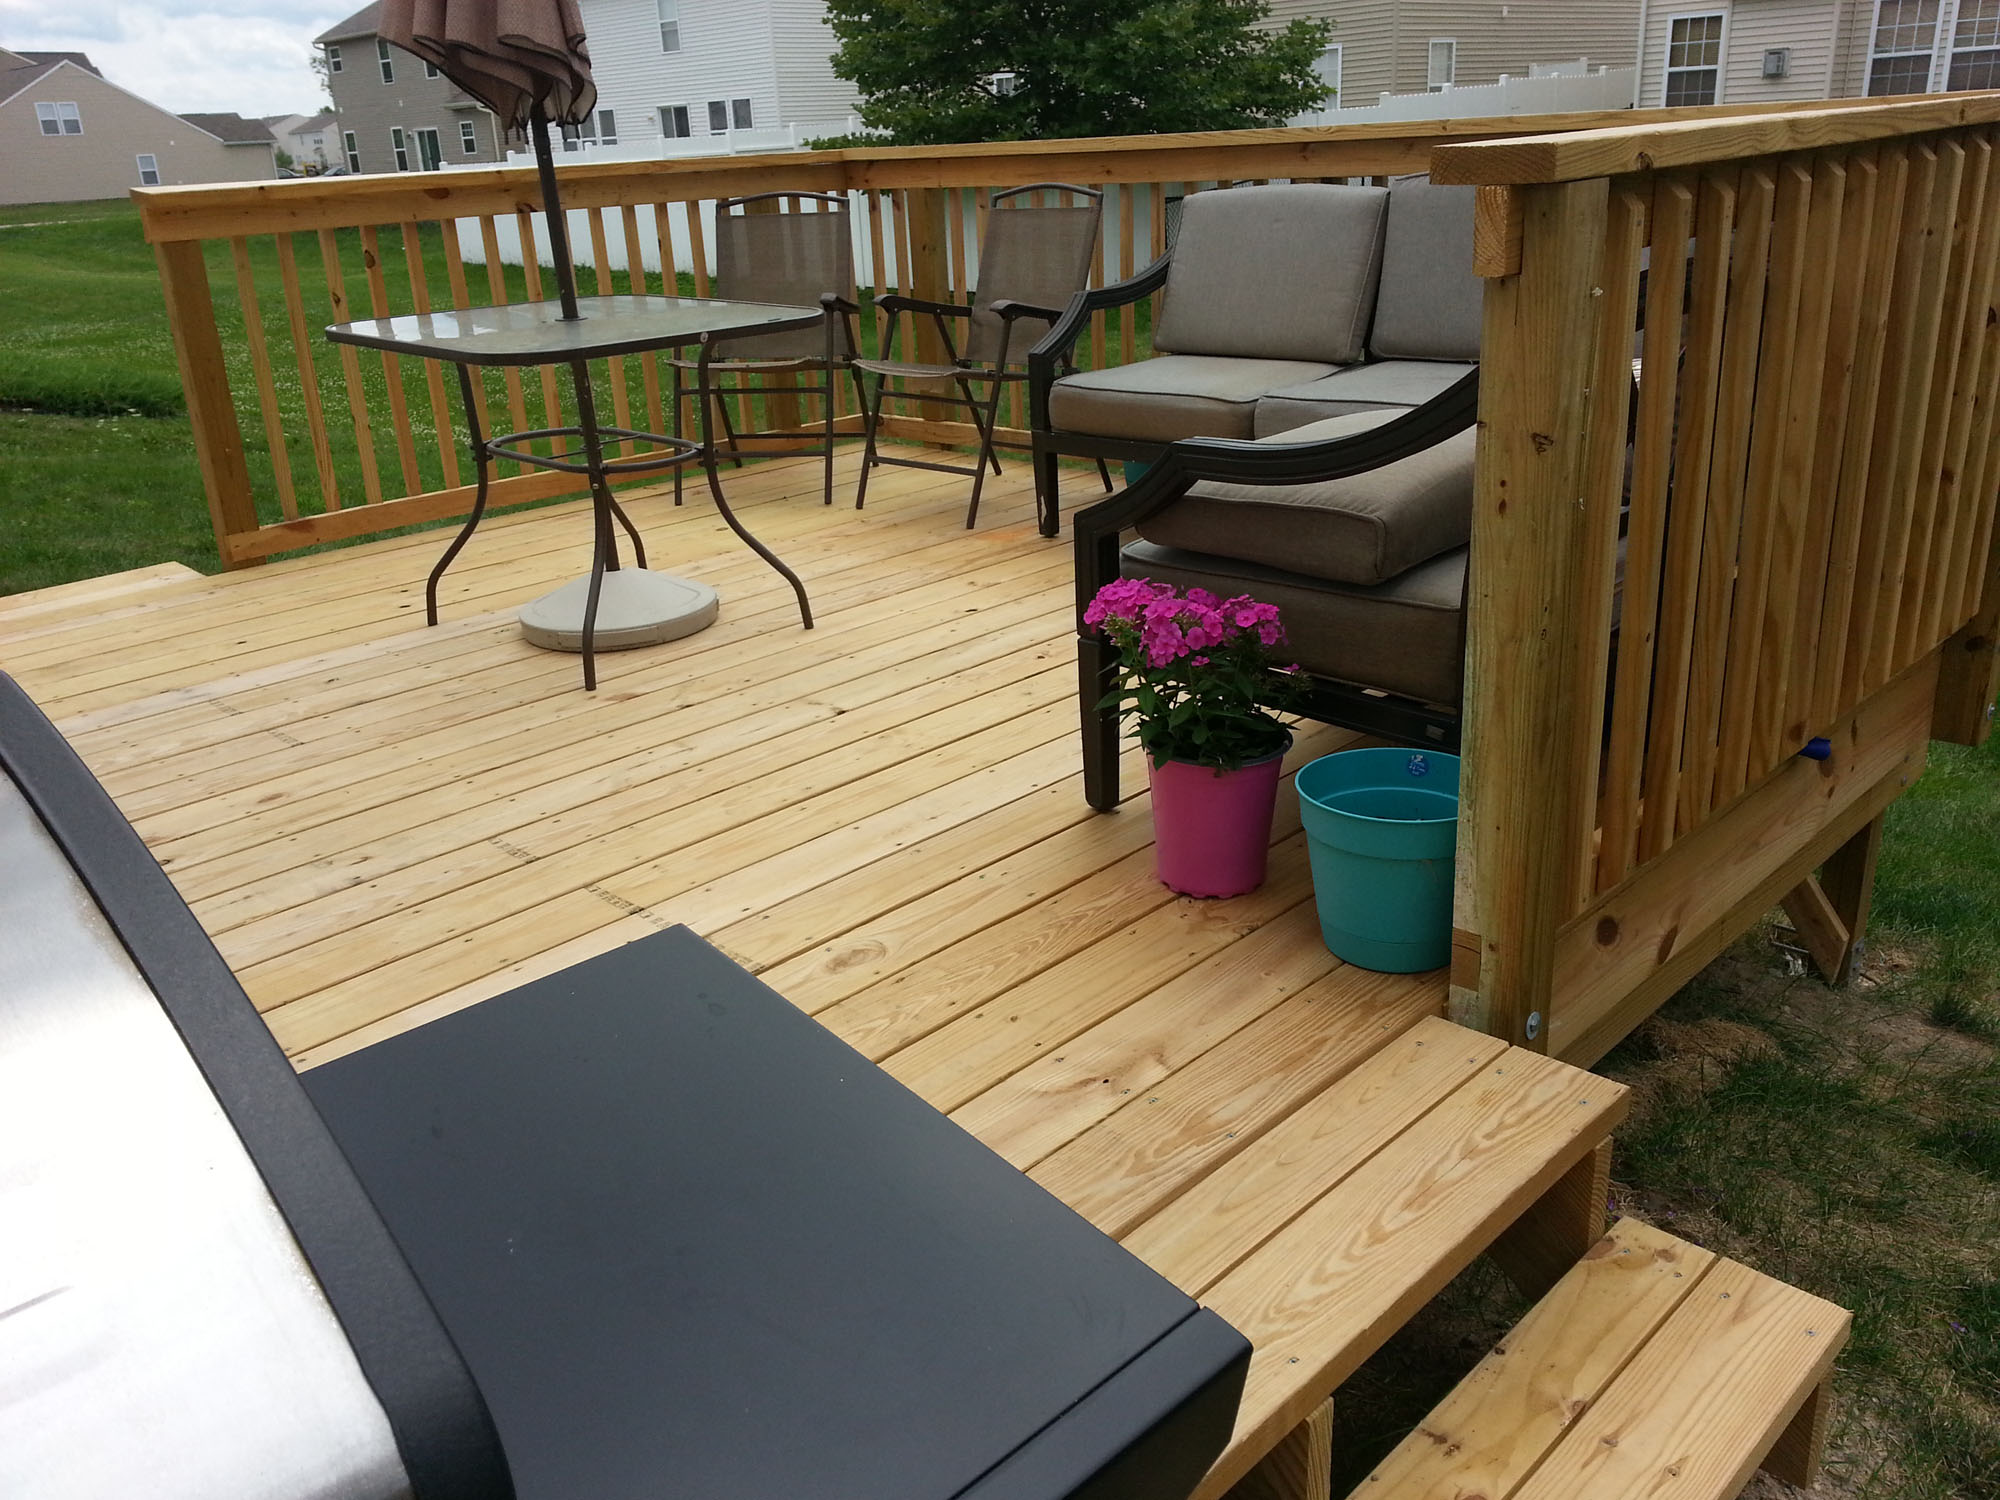 A brand new treated deck